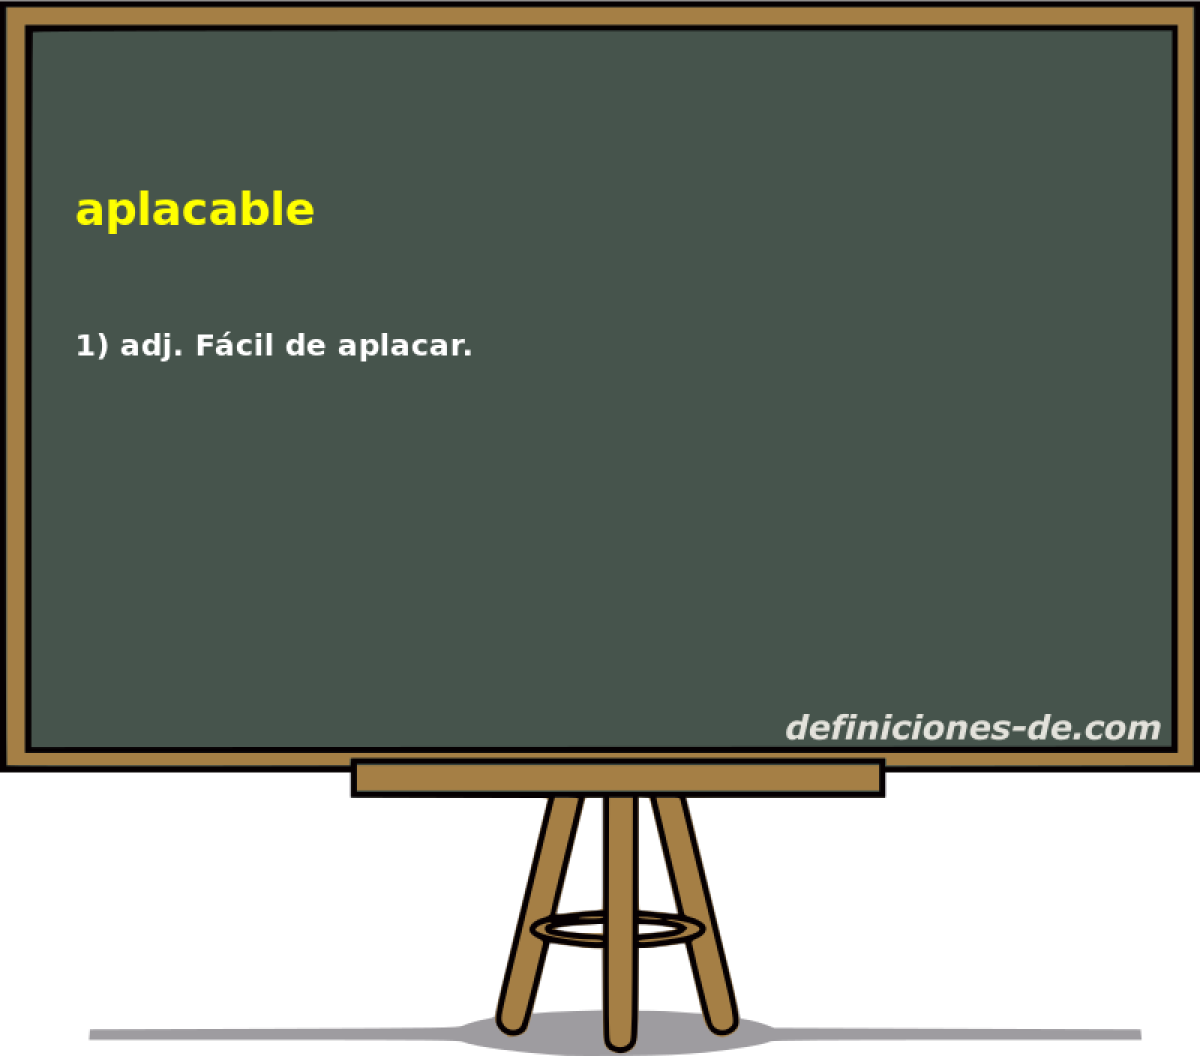 aplacable 